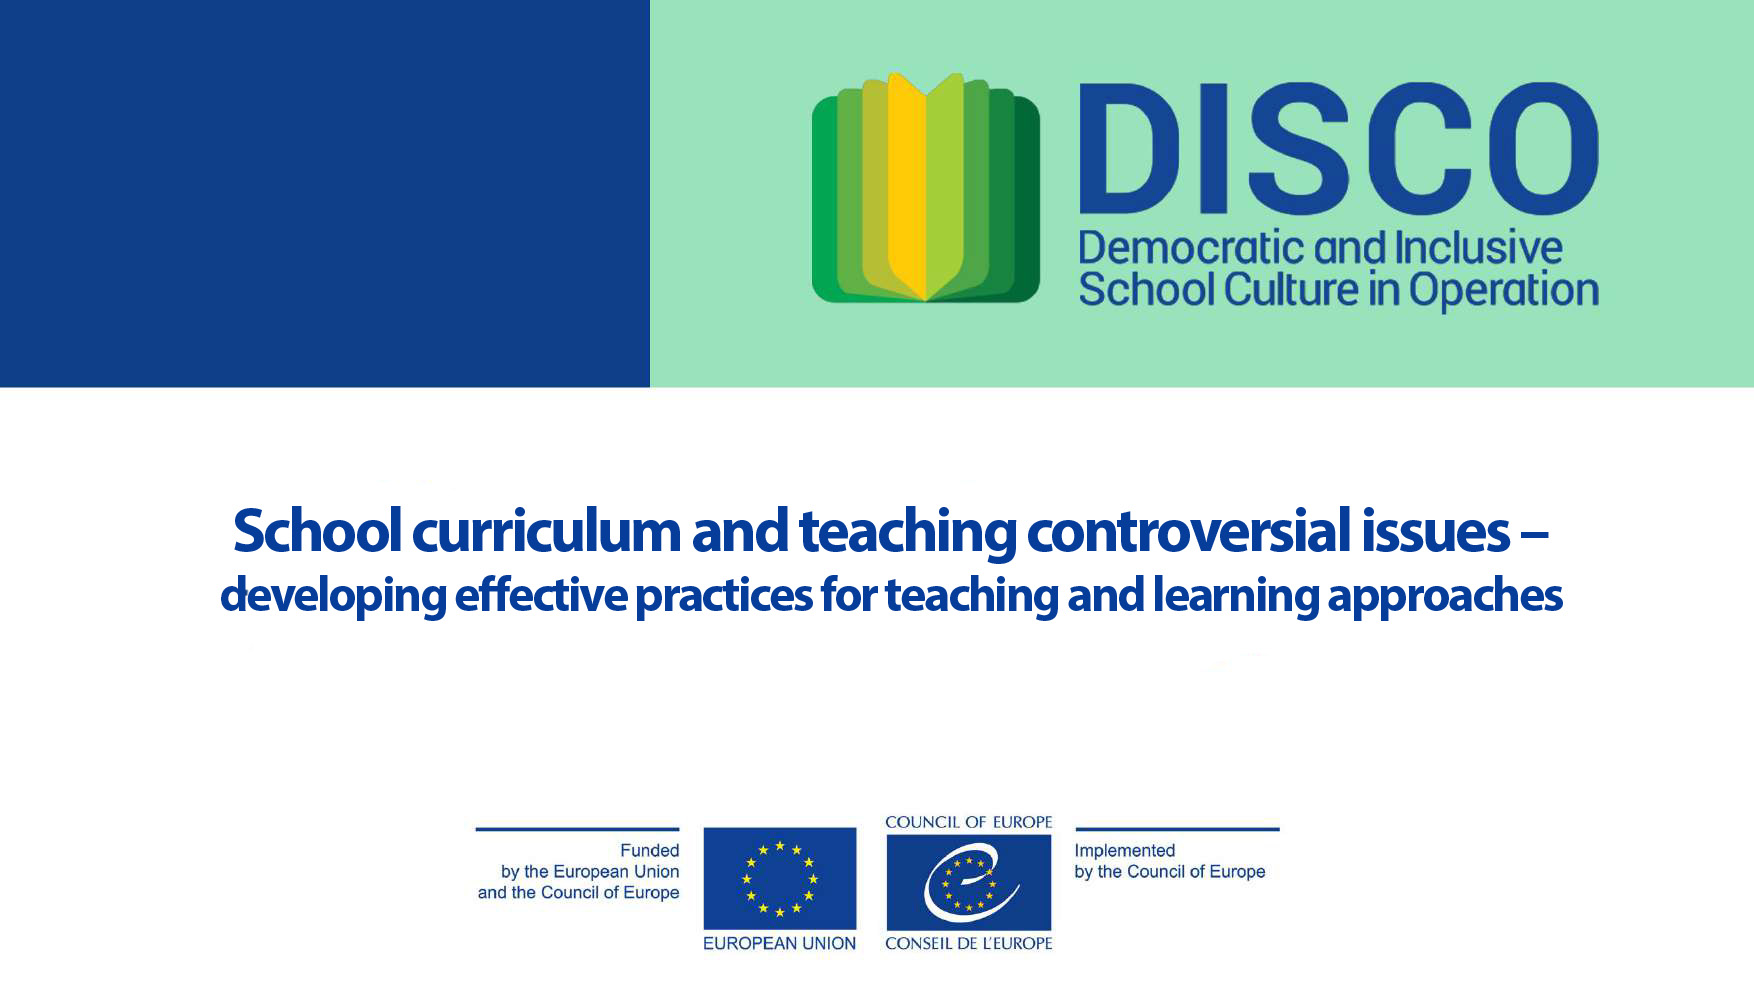 School curriculum and teaching controversial issues – developing effective practices for teaching and learning approaches